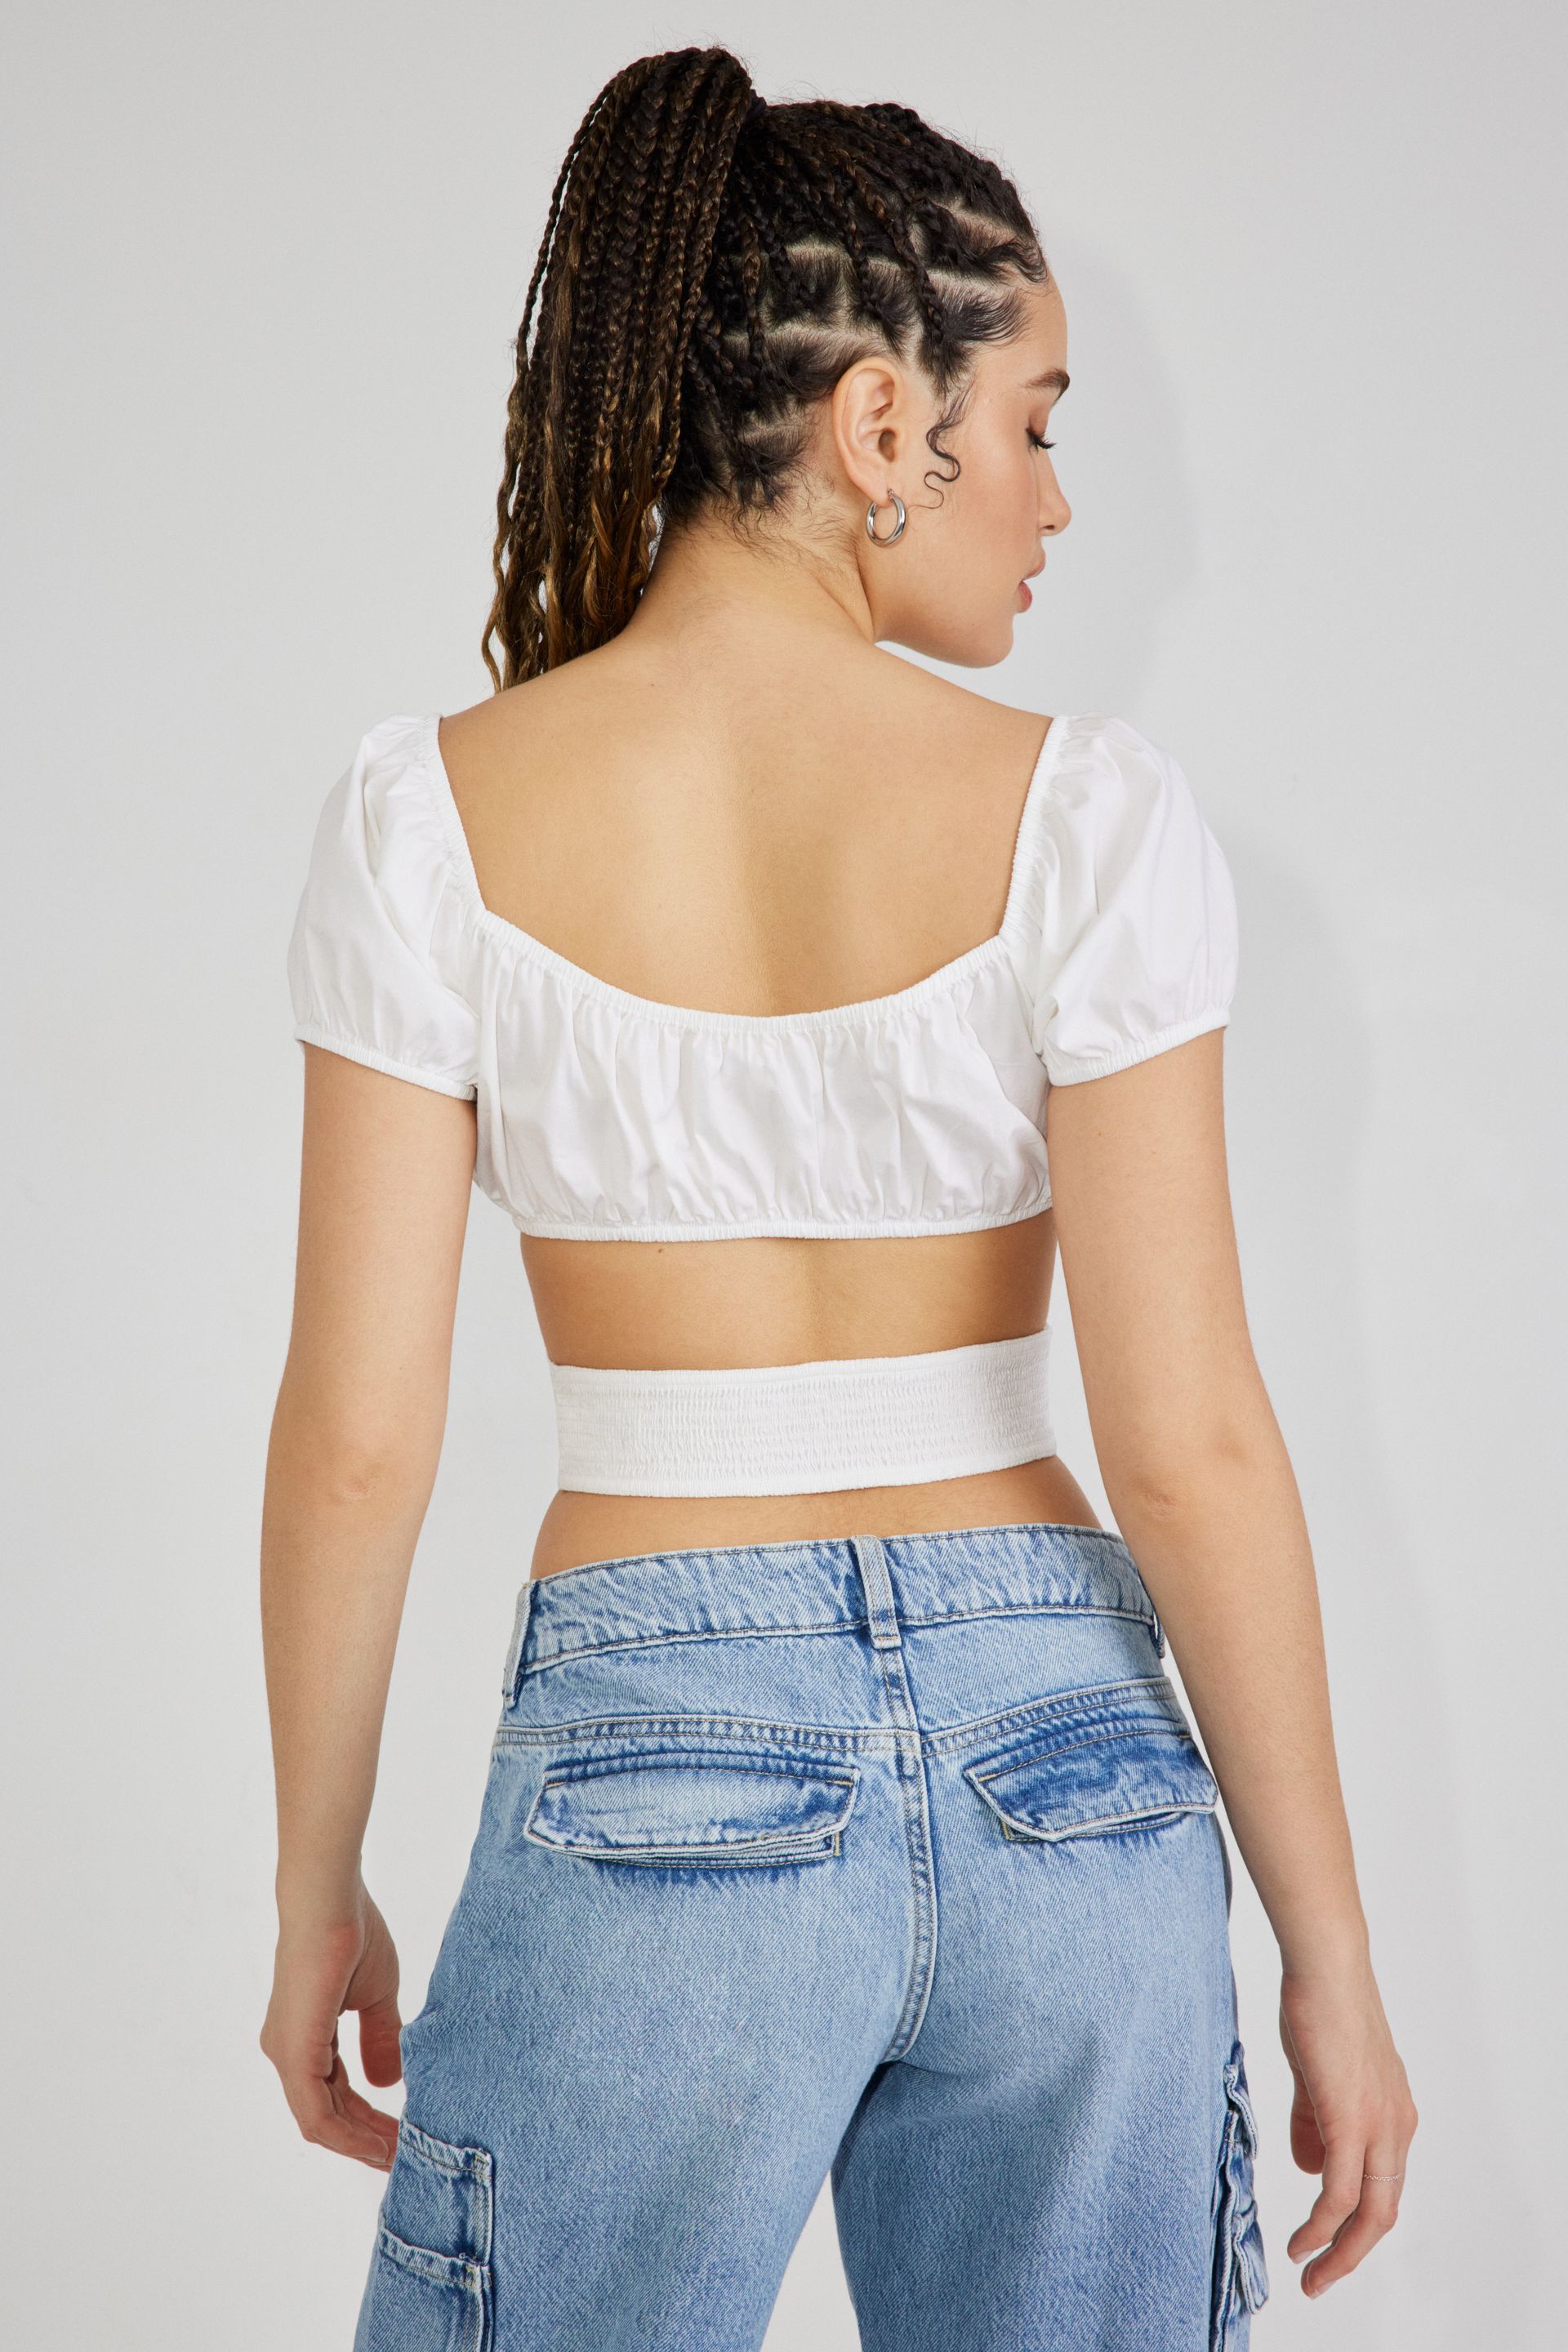 Cut Out Milkmaid Top